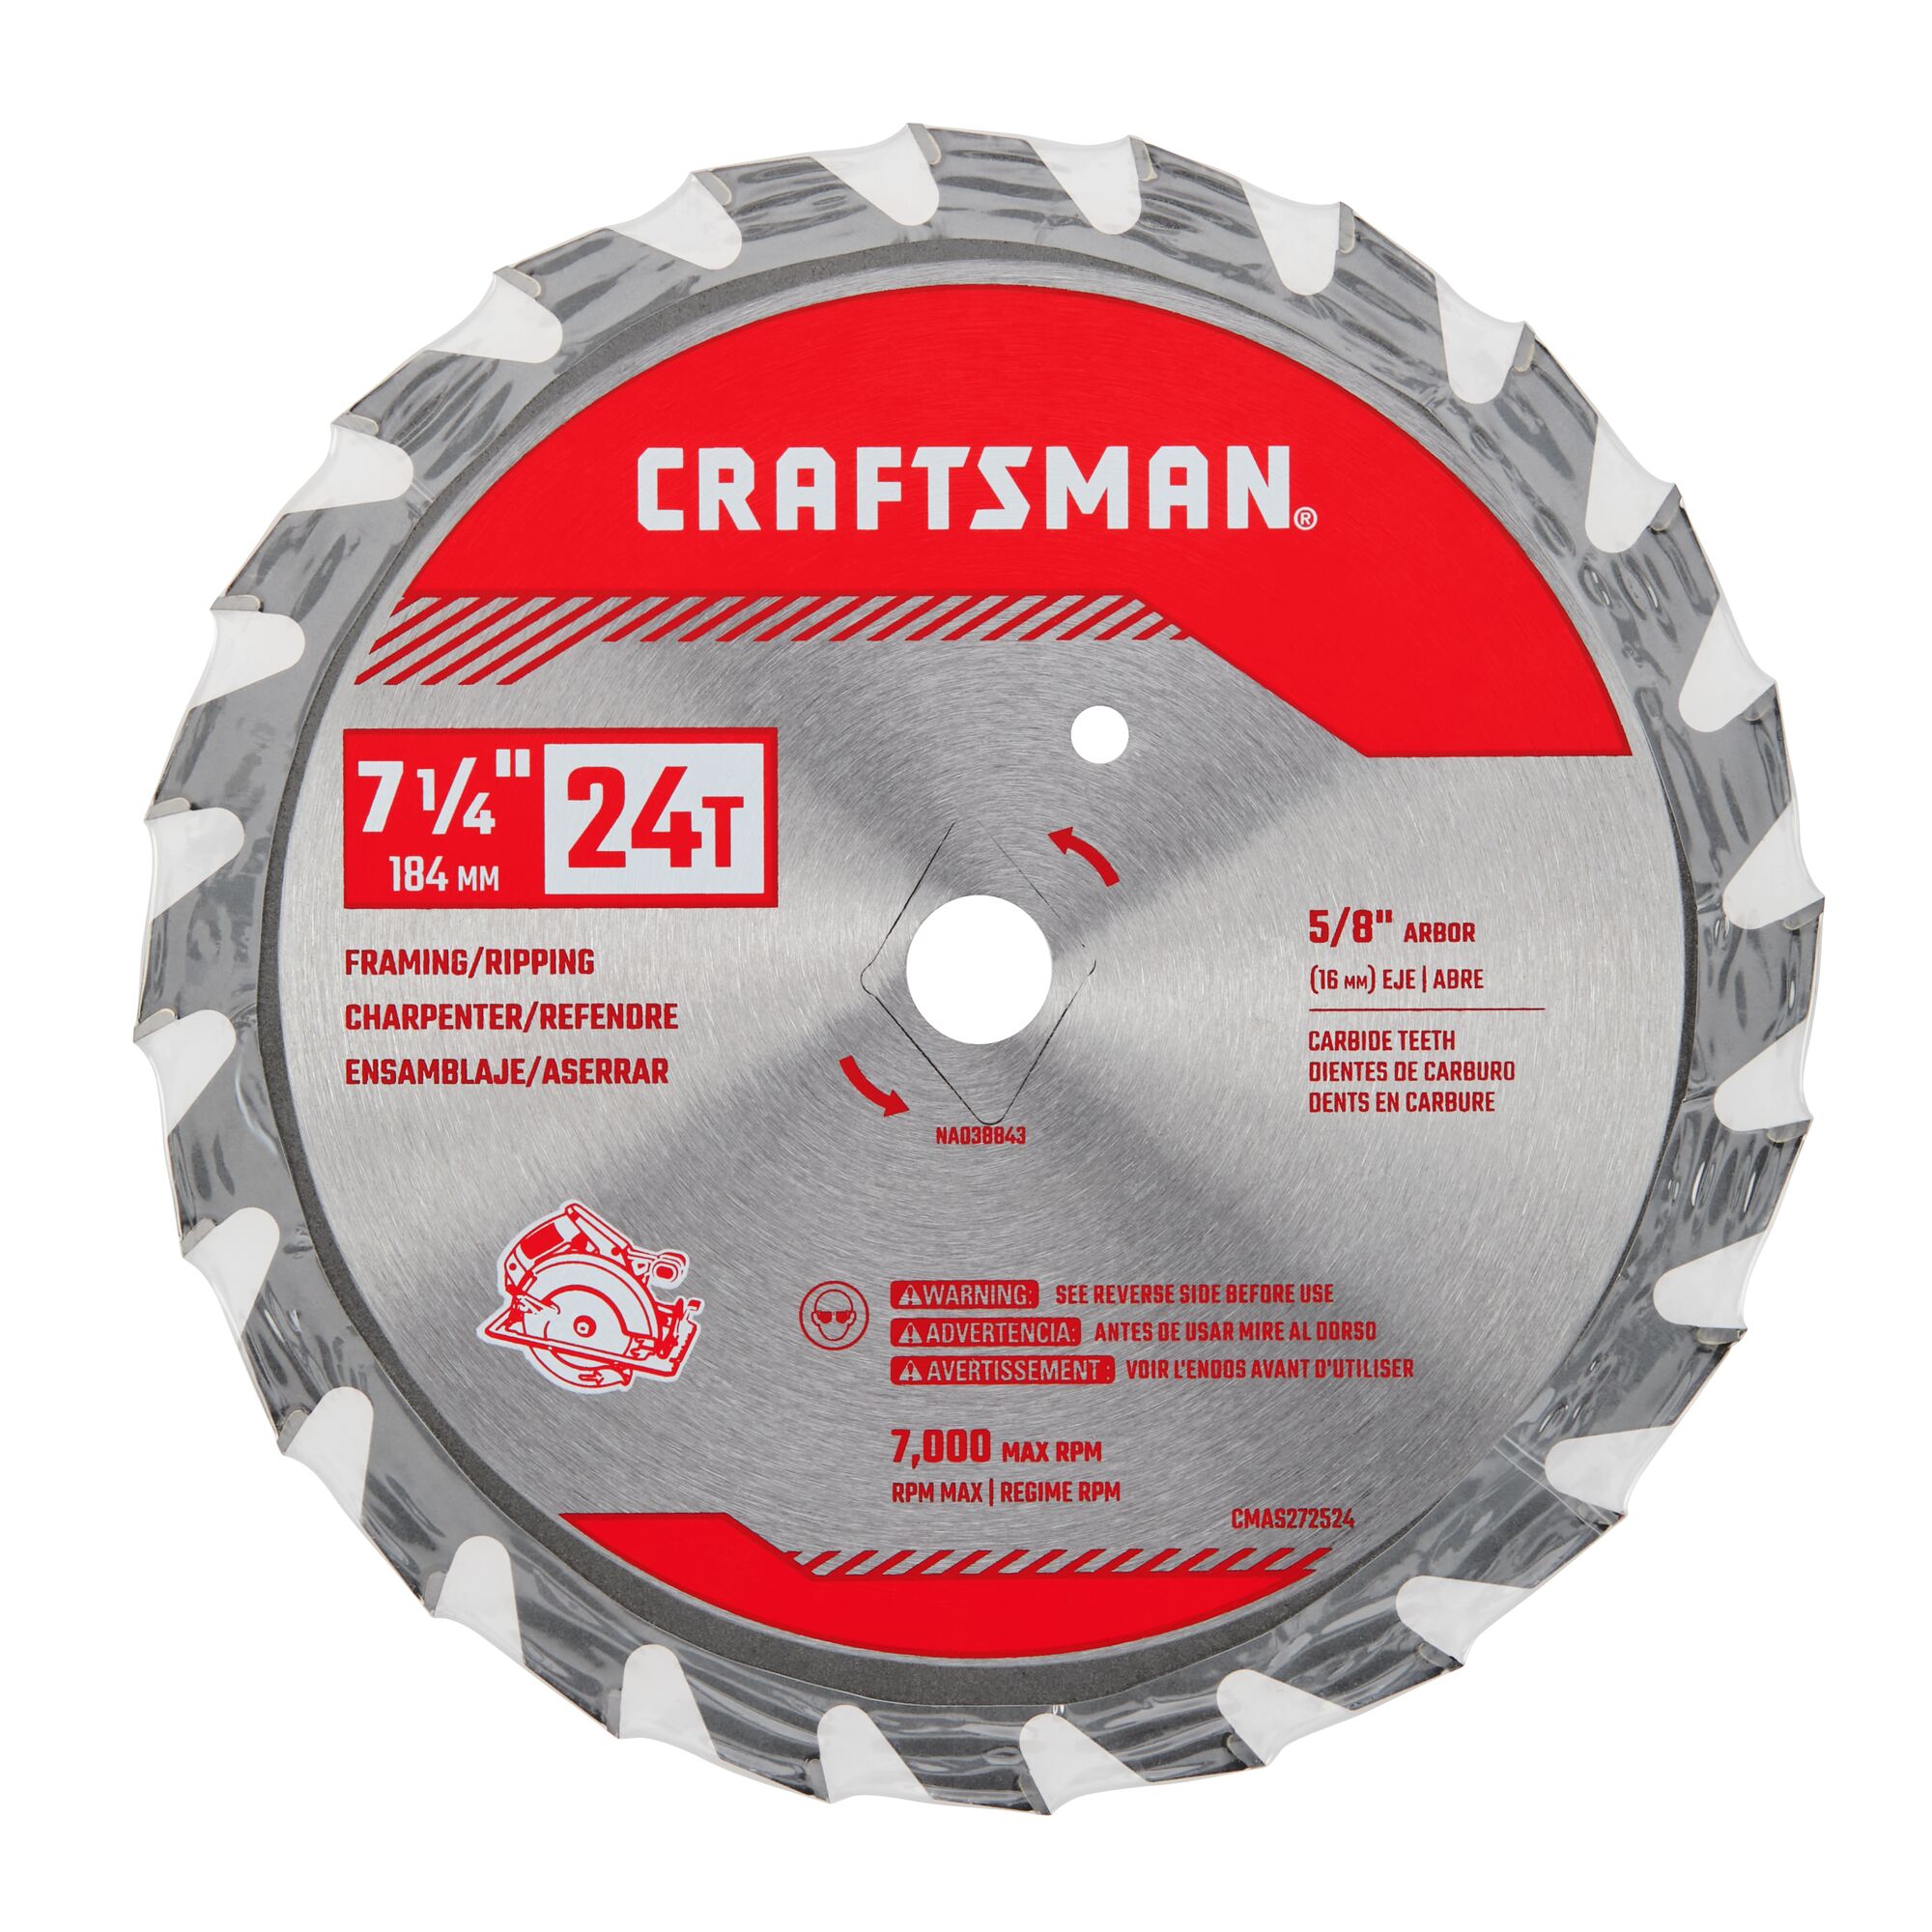 7 and a quarter inch 24 tooth framing ripping saw blade in plastic packaging.